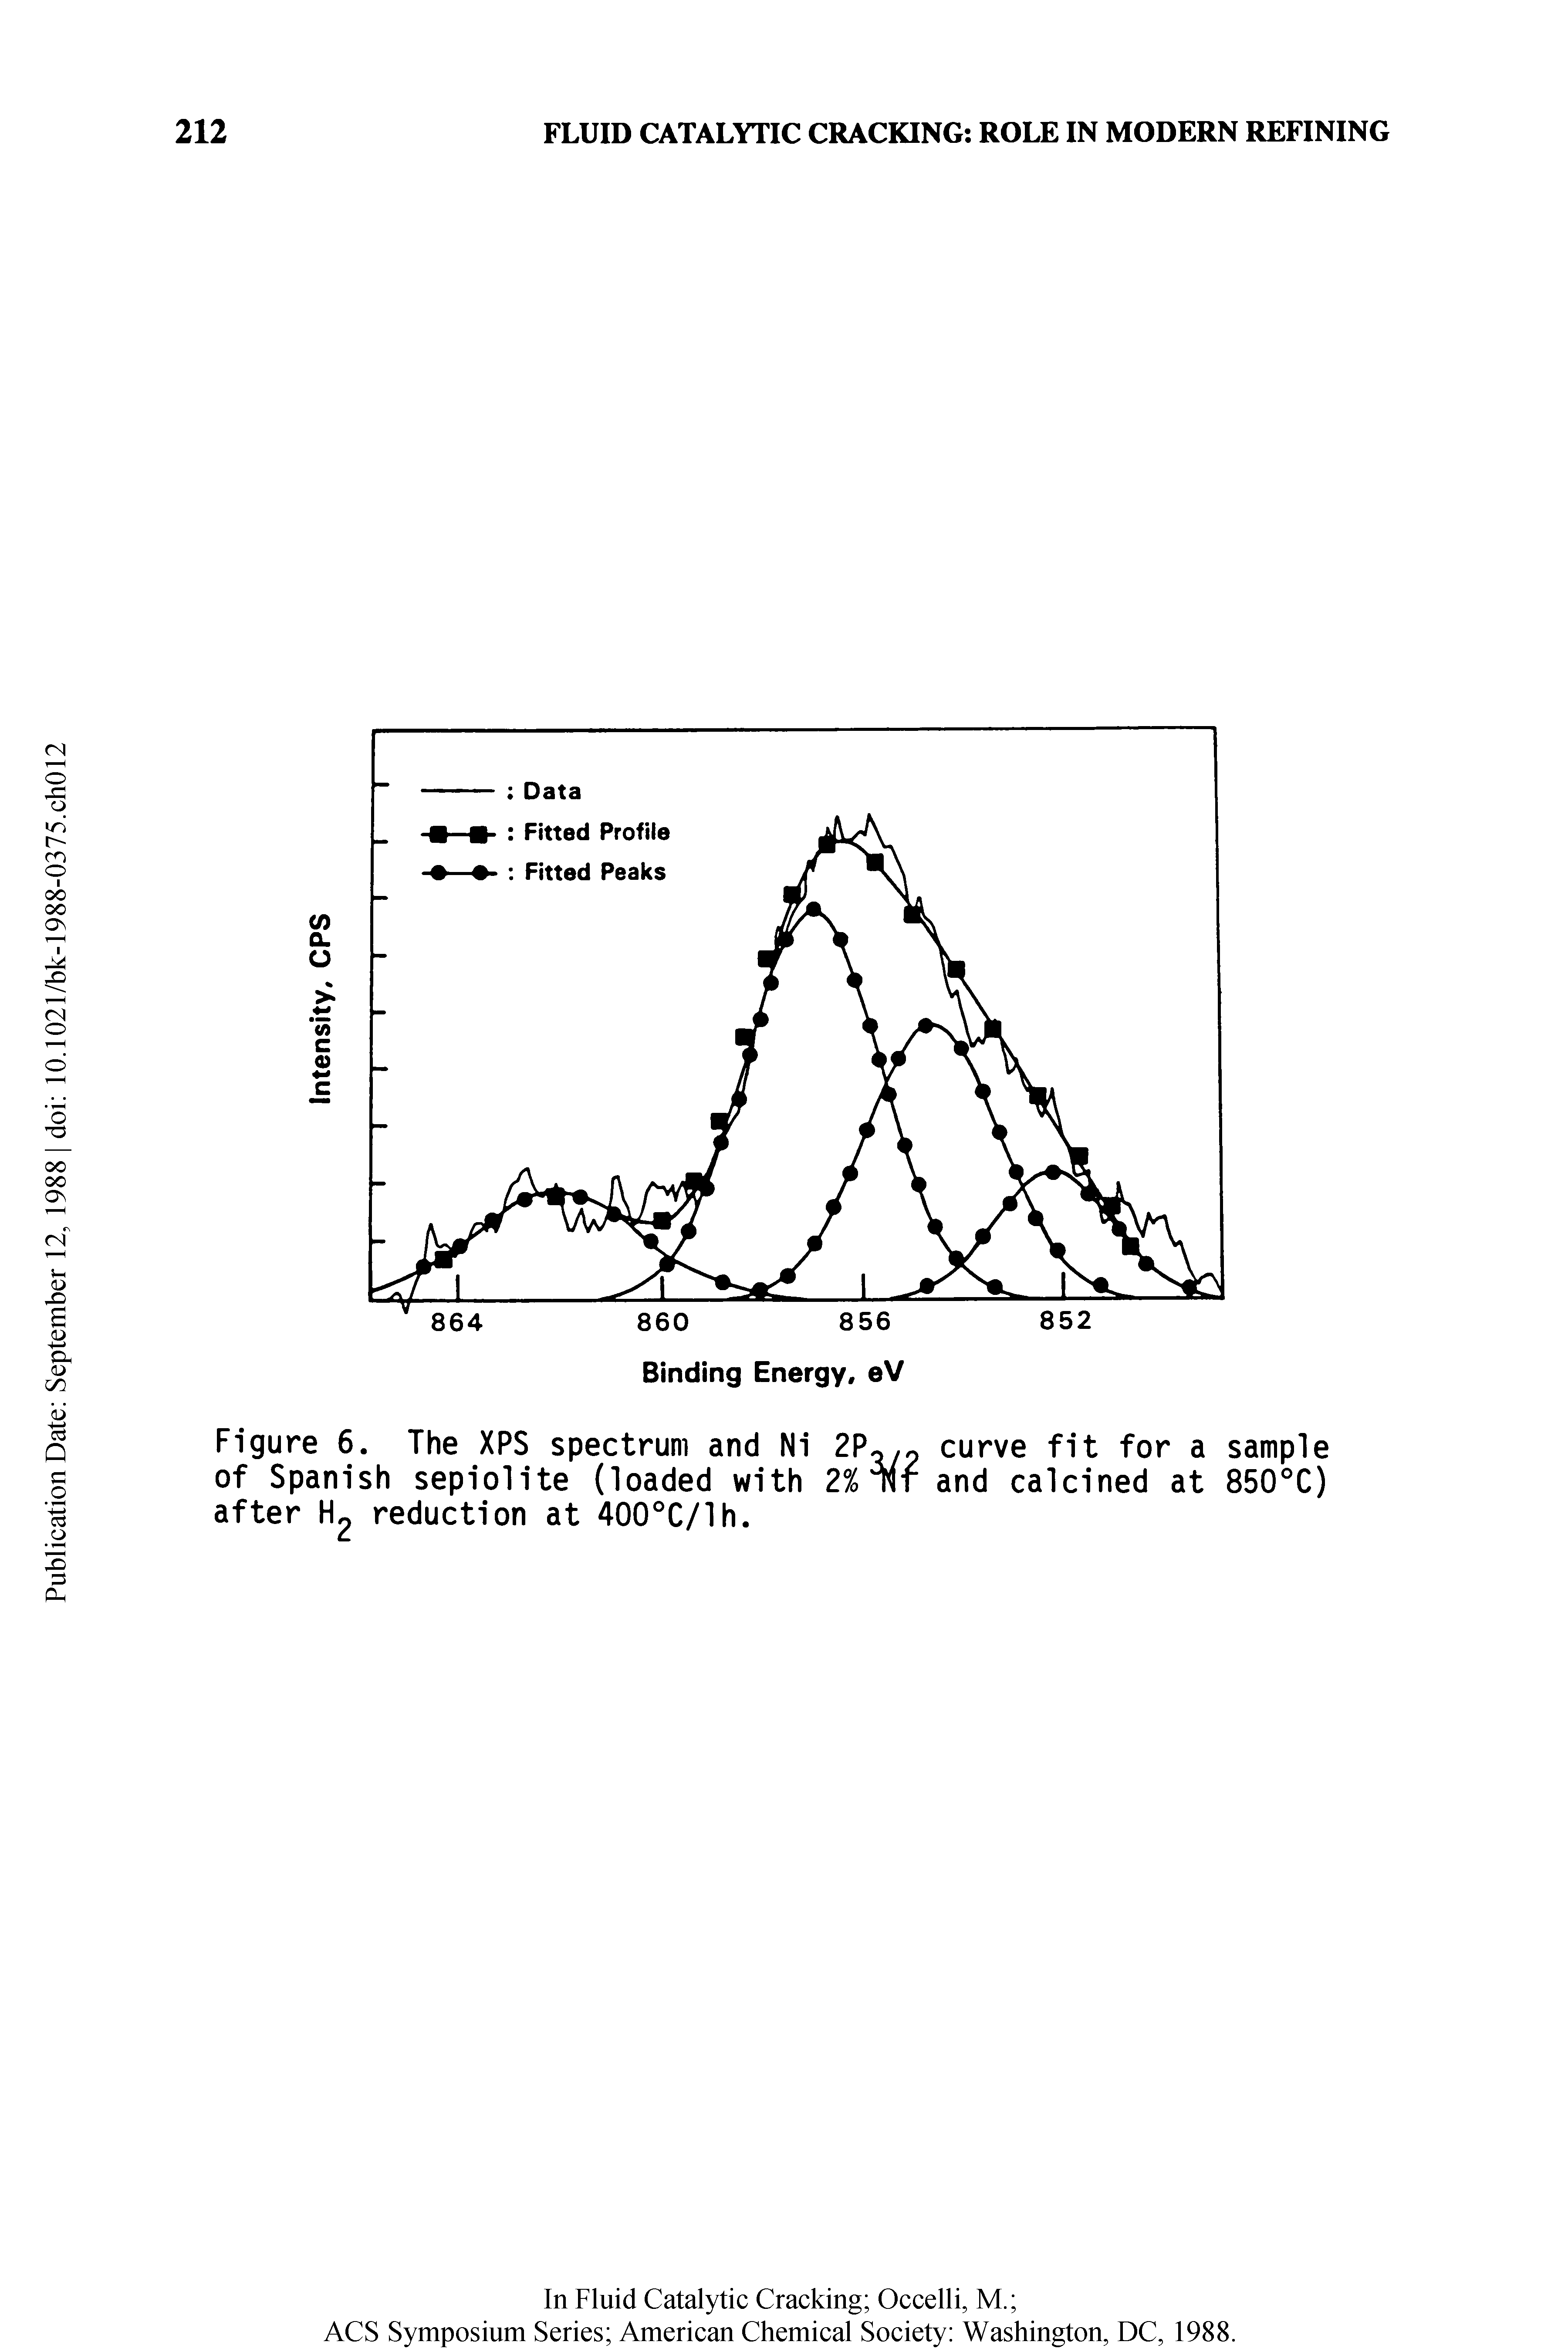 Figure 6. The XPS spectrum and Ni curve fit for a sample of Spanish sepiolite (loaded with 2%and calcined at 850°C) after reduction at 400°C/lh.